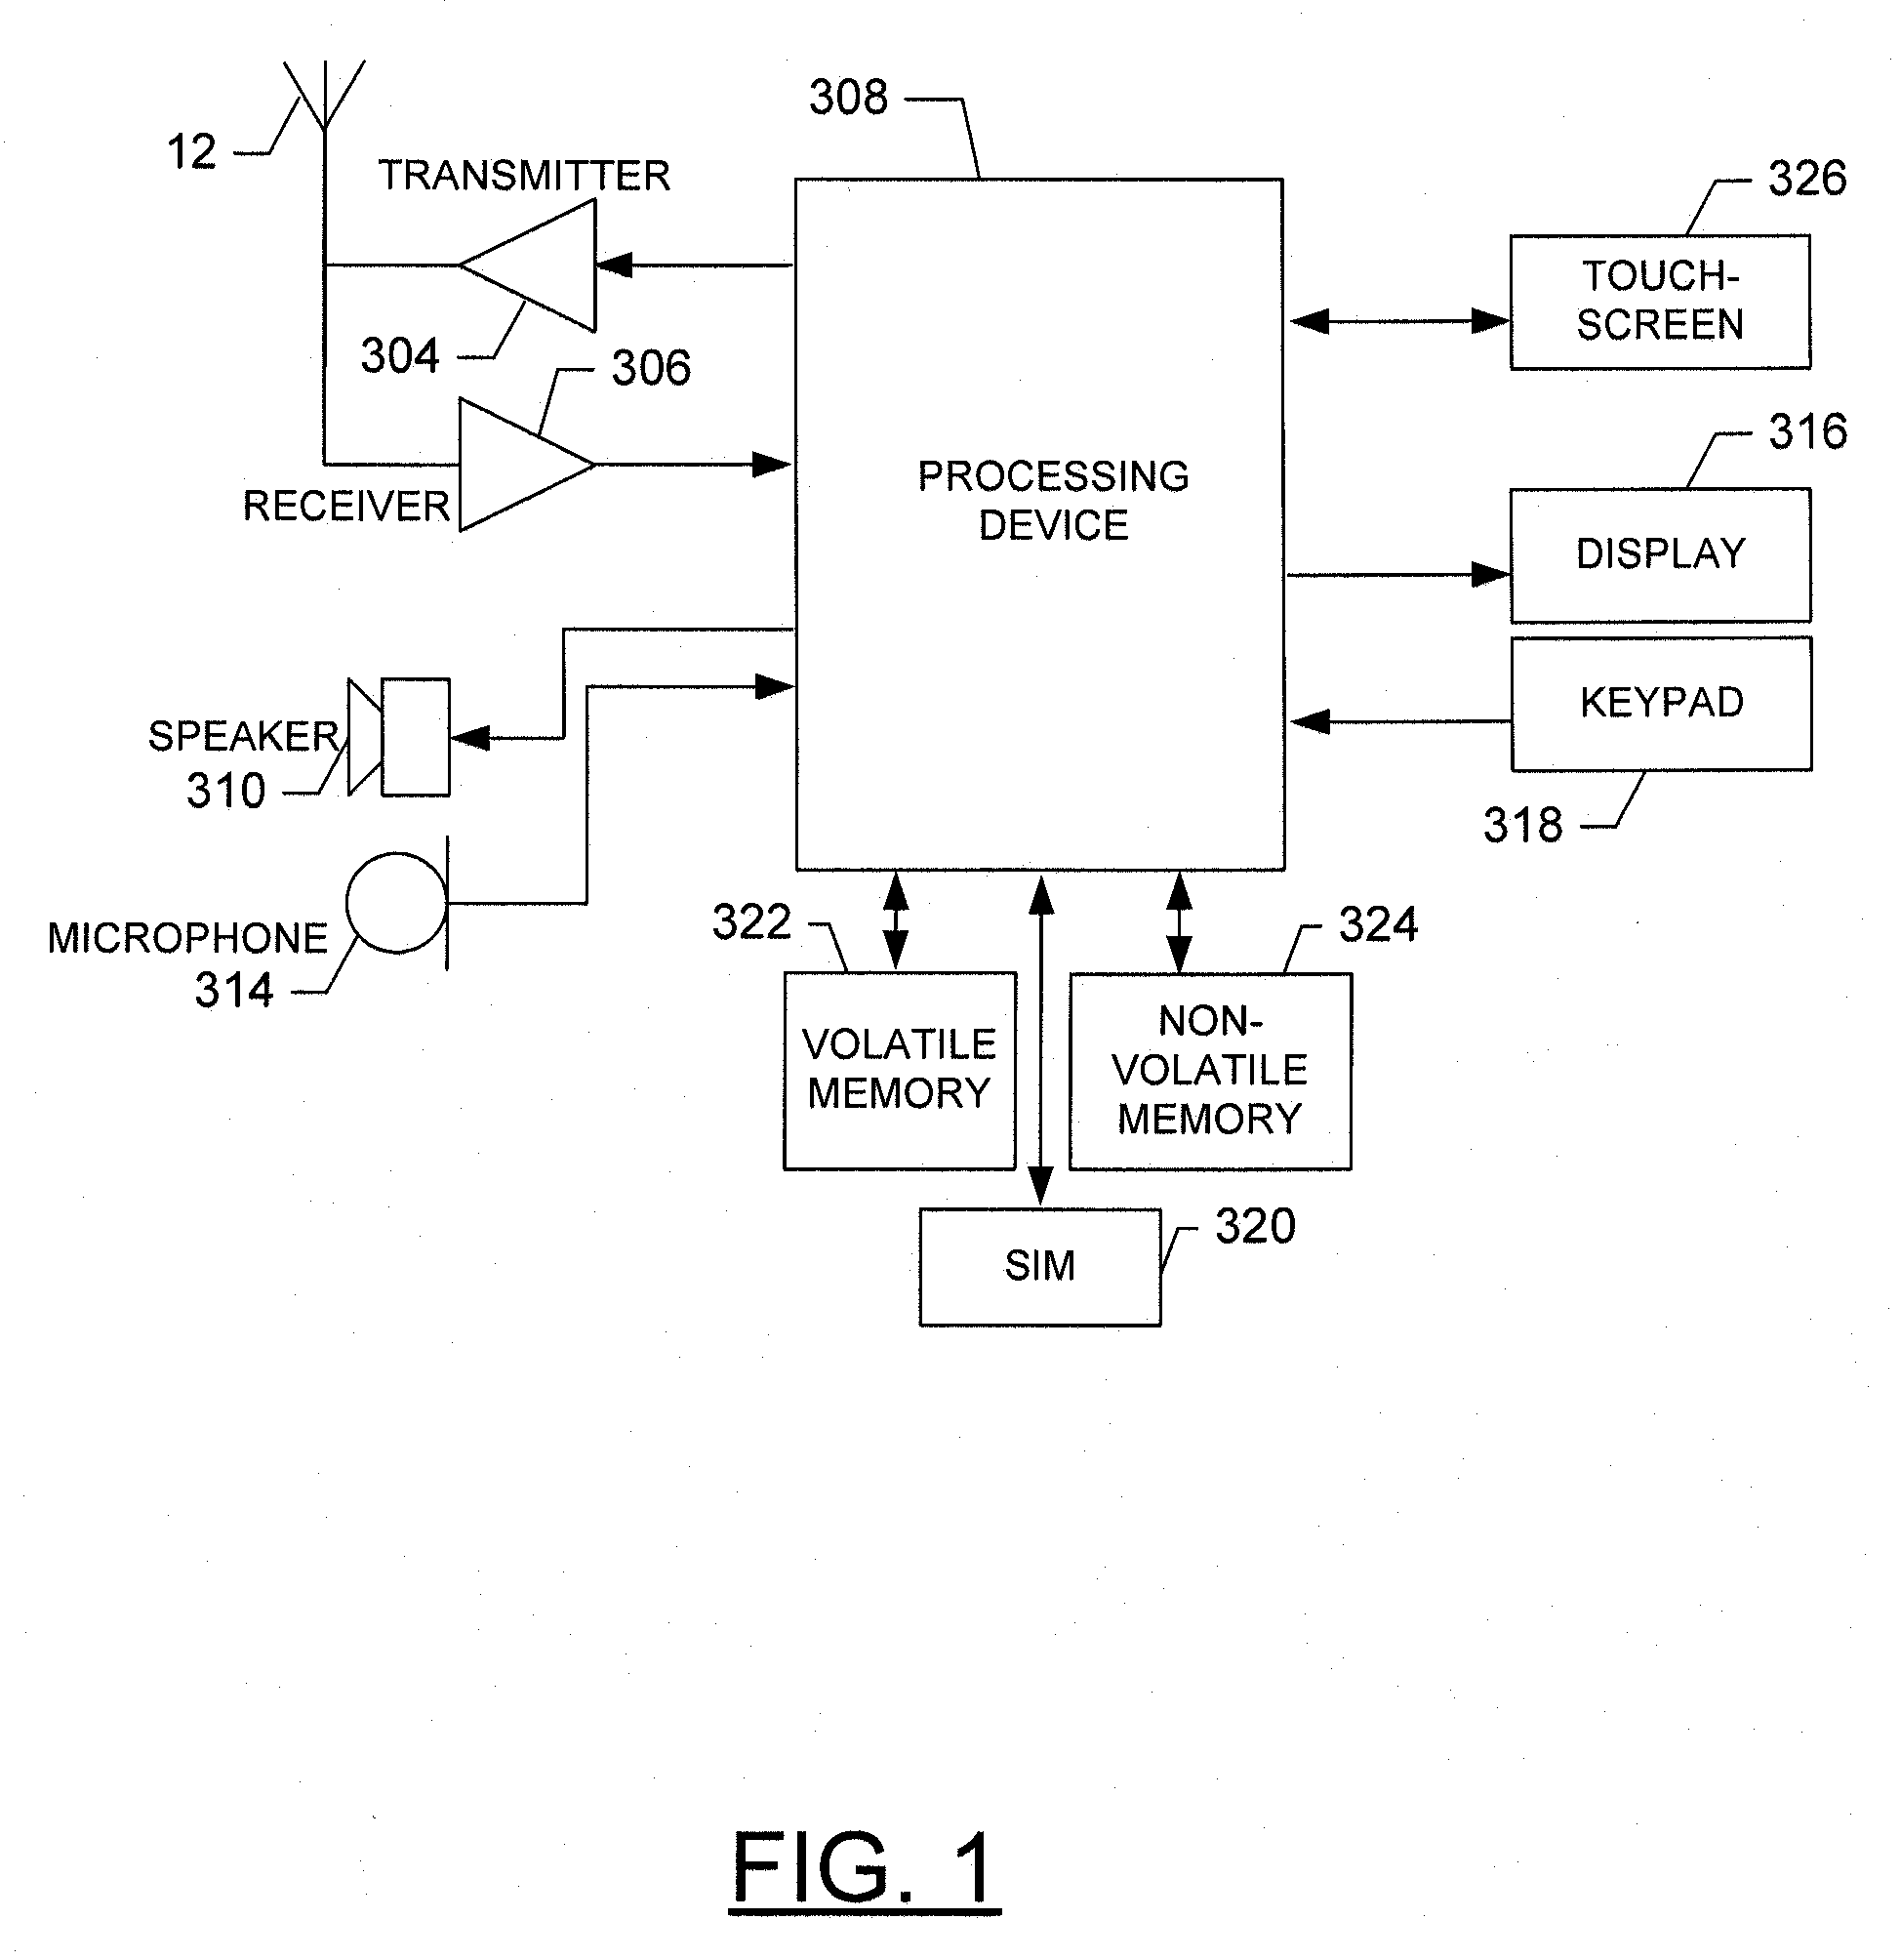 Method, apparatus and computer program product for facilitating data entry using an offset connection element